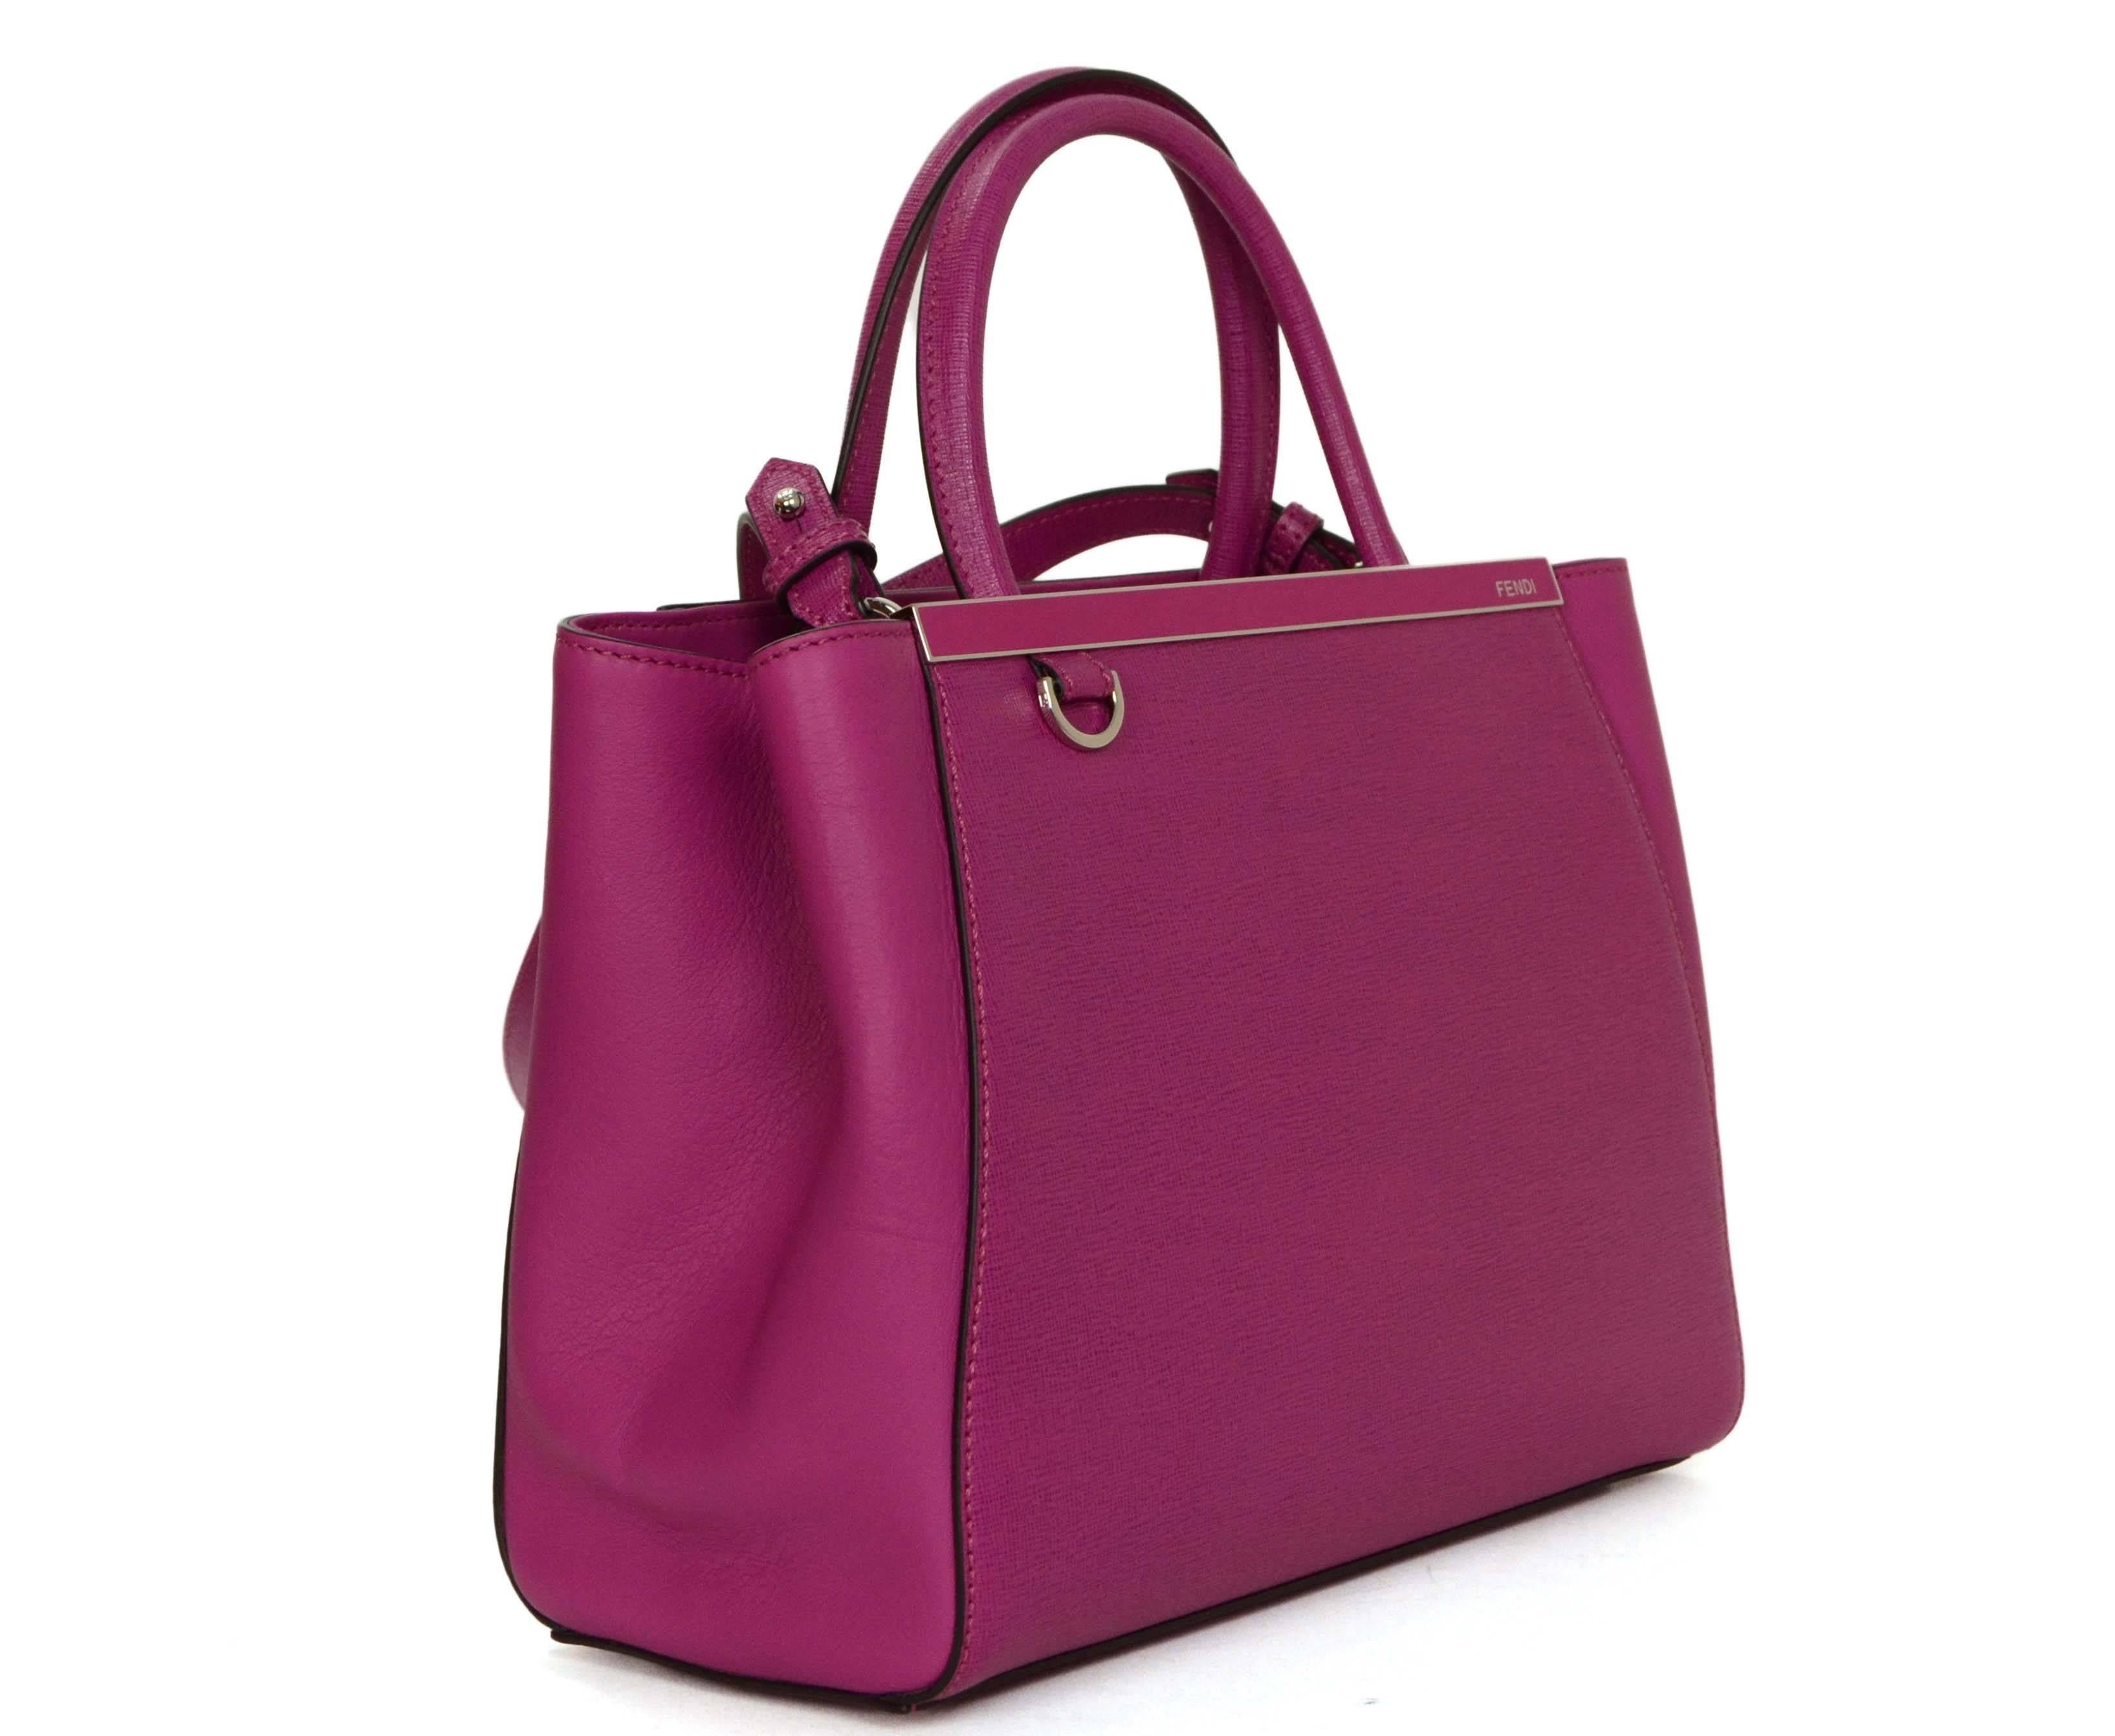 Fendi Magenta 2Jours Petite Saffiano Shopper Tote 
Features optional crossbody strap
Made In: Italy
Color: Magenta
Hardware: Silvertone
Materials: Saffiano leather
Lining: Magenta stripe textile
Closure/Opening: Open top with center magnetic